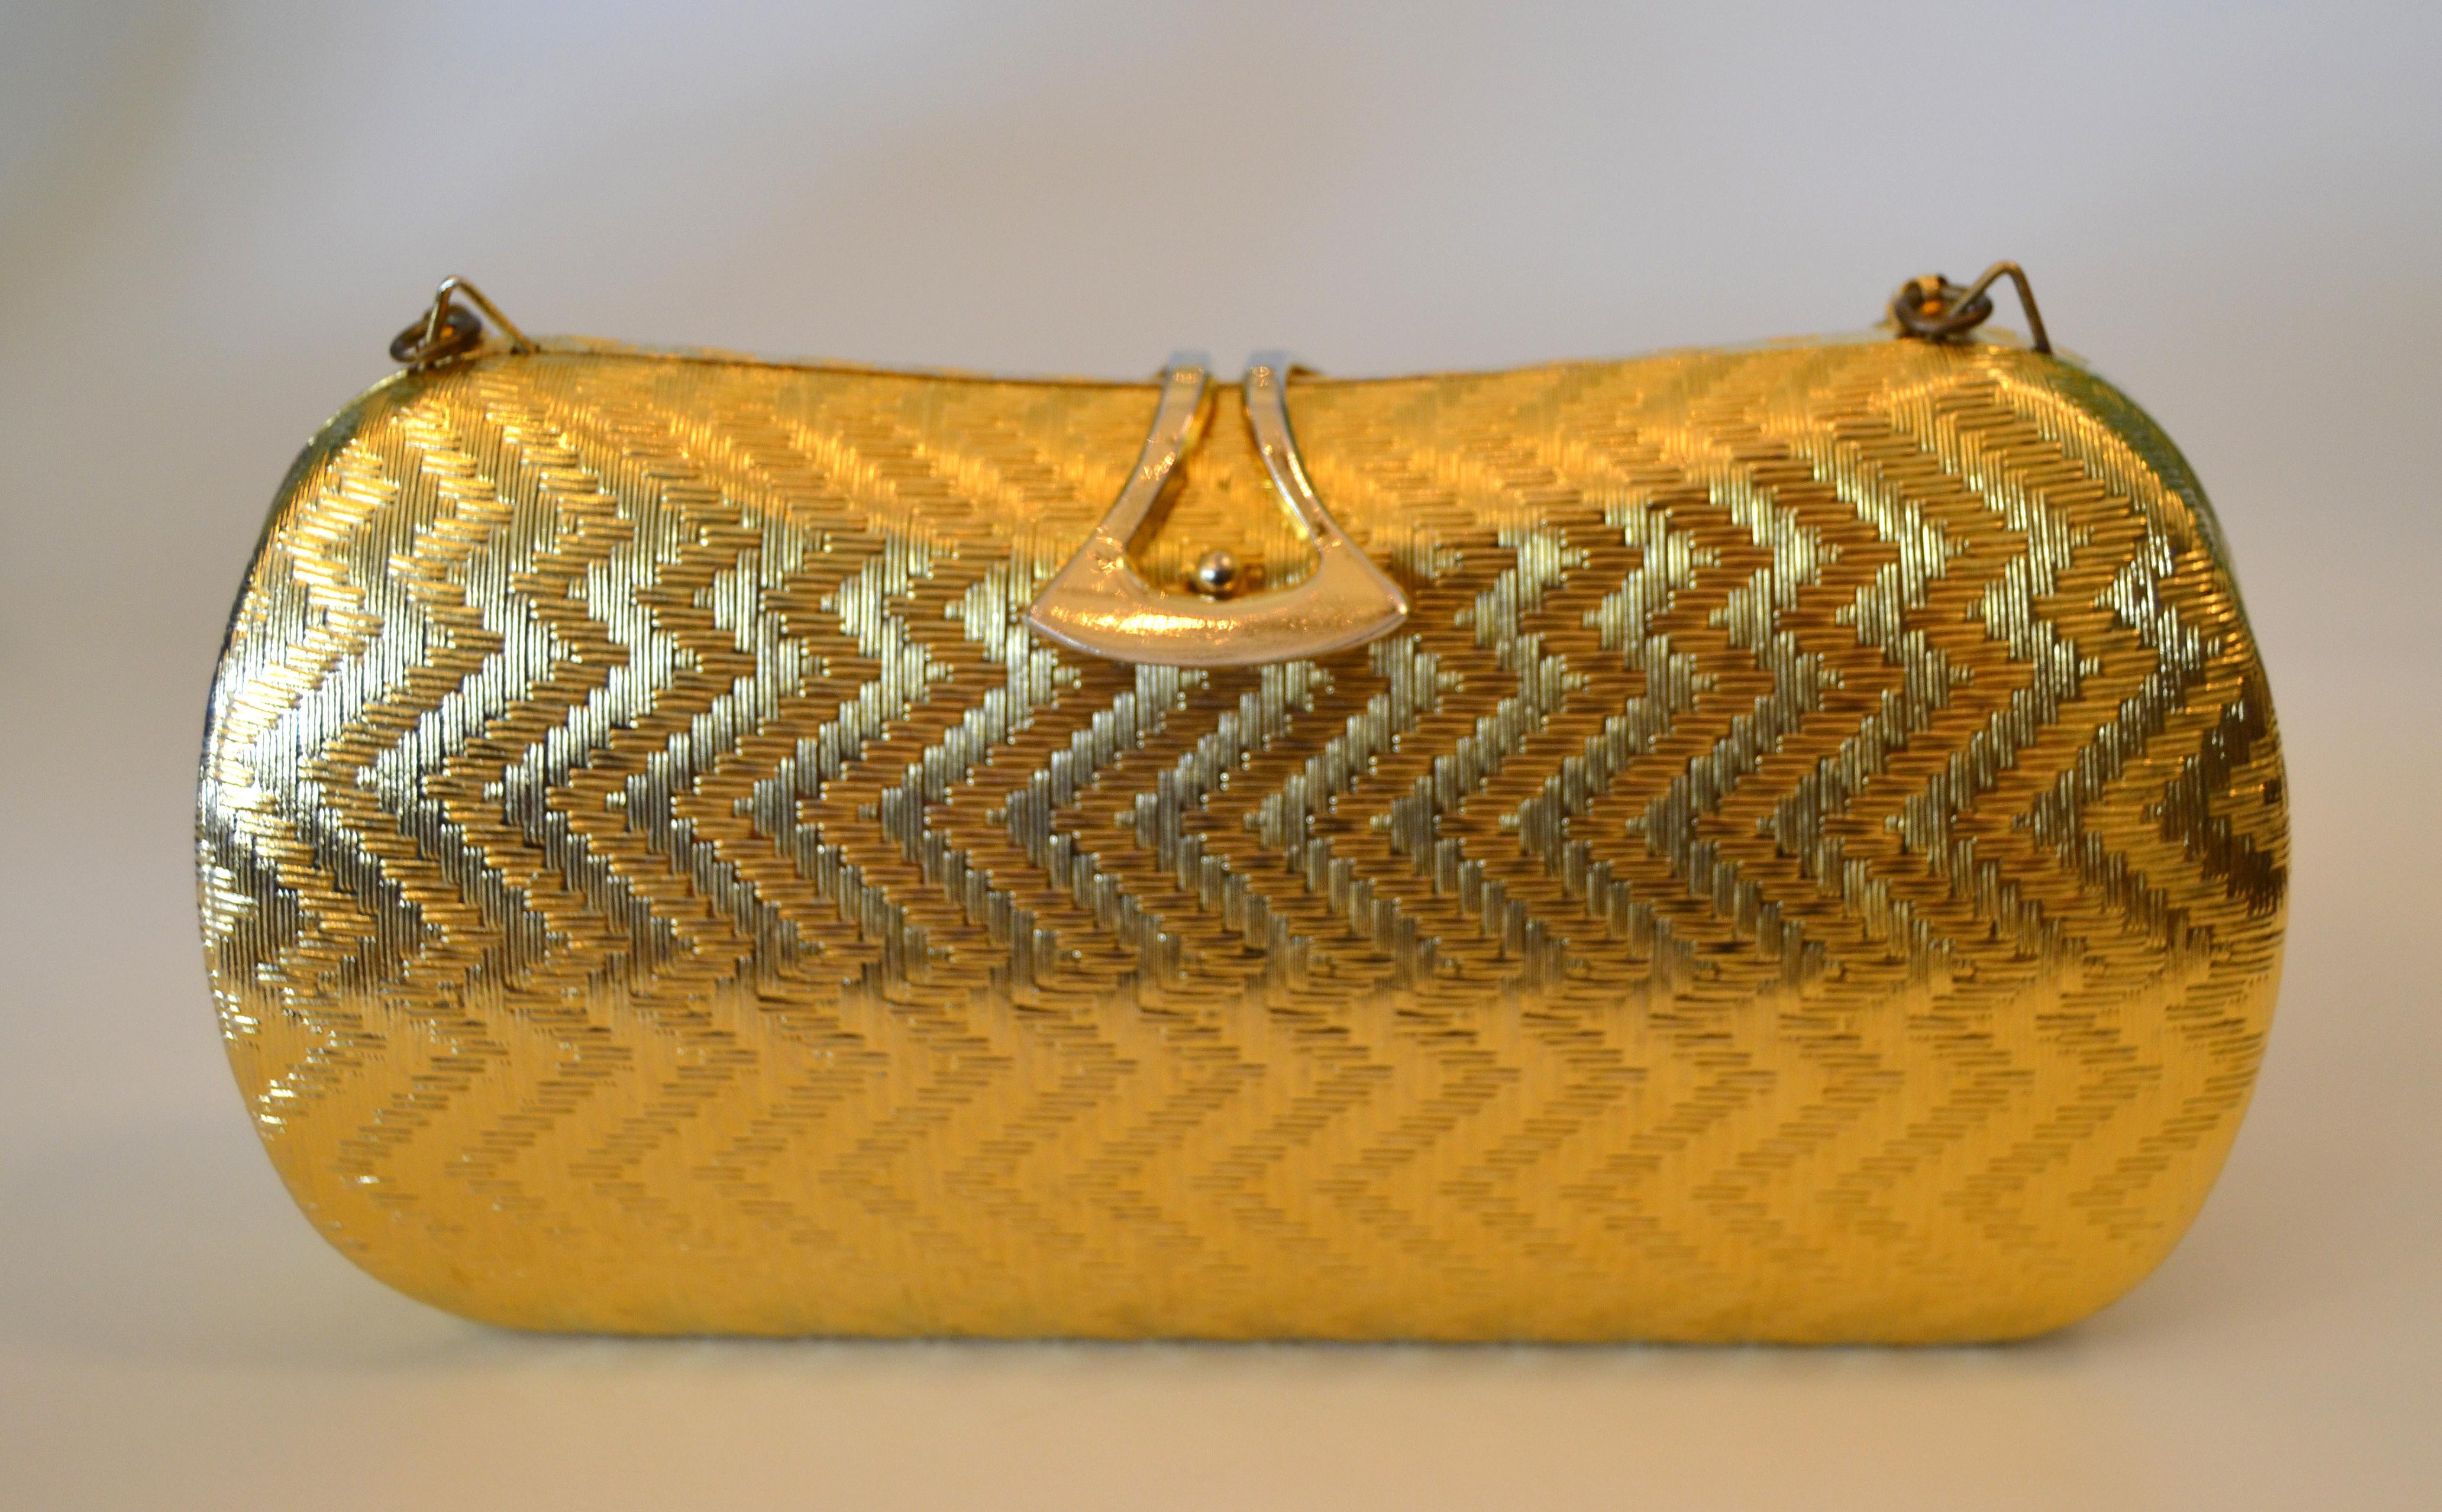 Italian vintage brass and velvet night out purse, shoulder bag, clutch or handbag.
Marked inside, made in Italy.
Measures: Length of chain 36 inches.